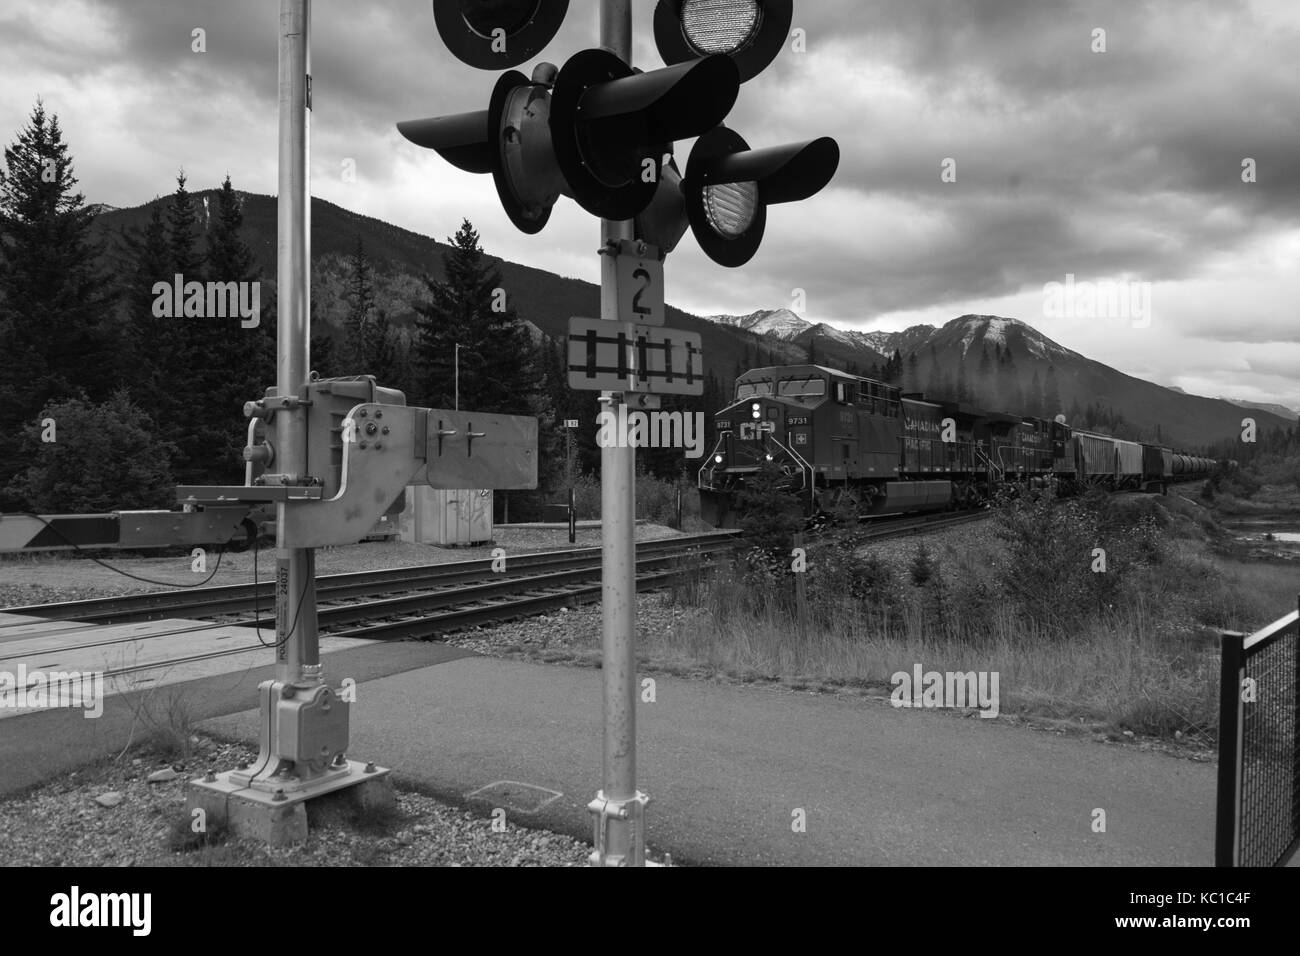 Canadian pacific railway Black and White Stock Photos & Images - Alamy